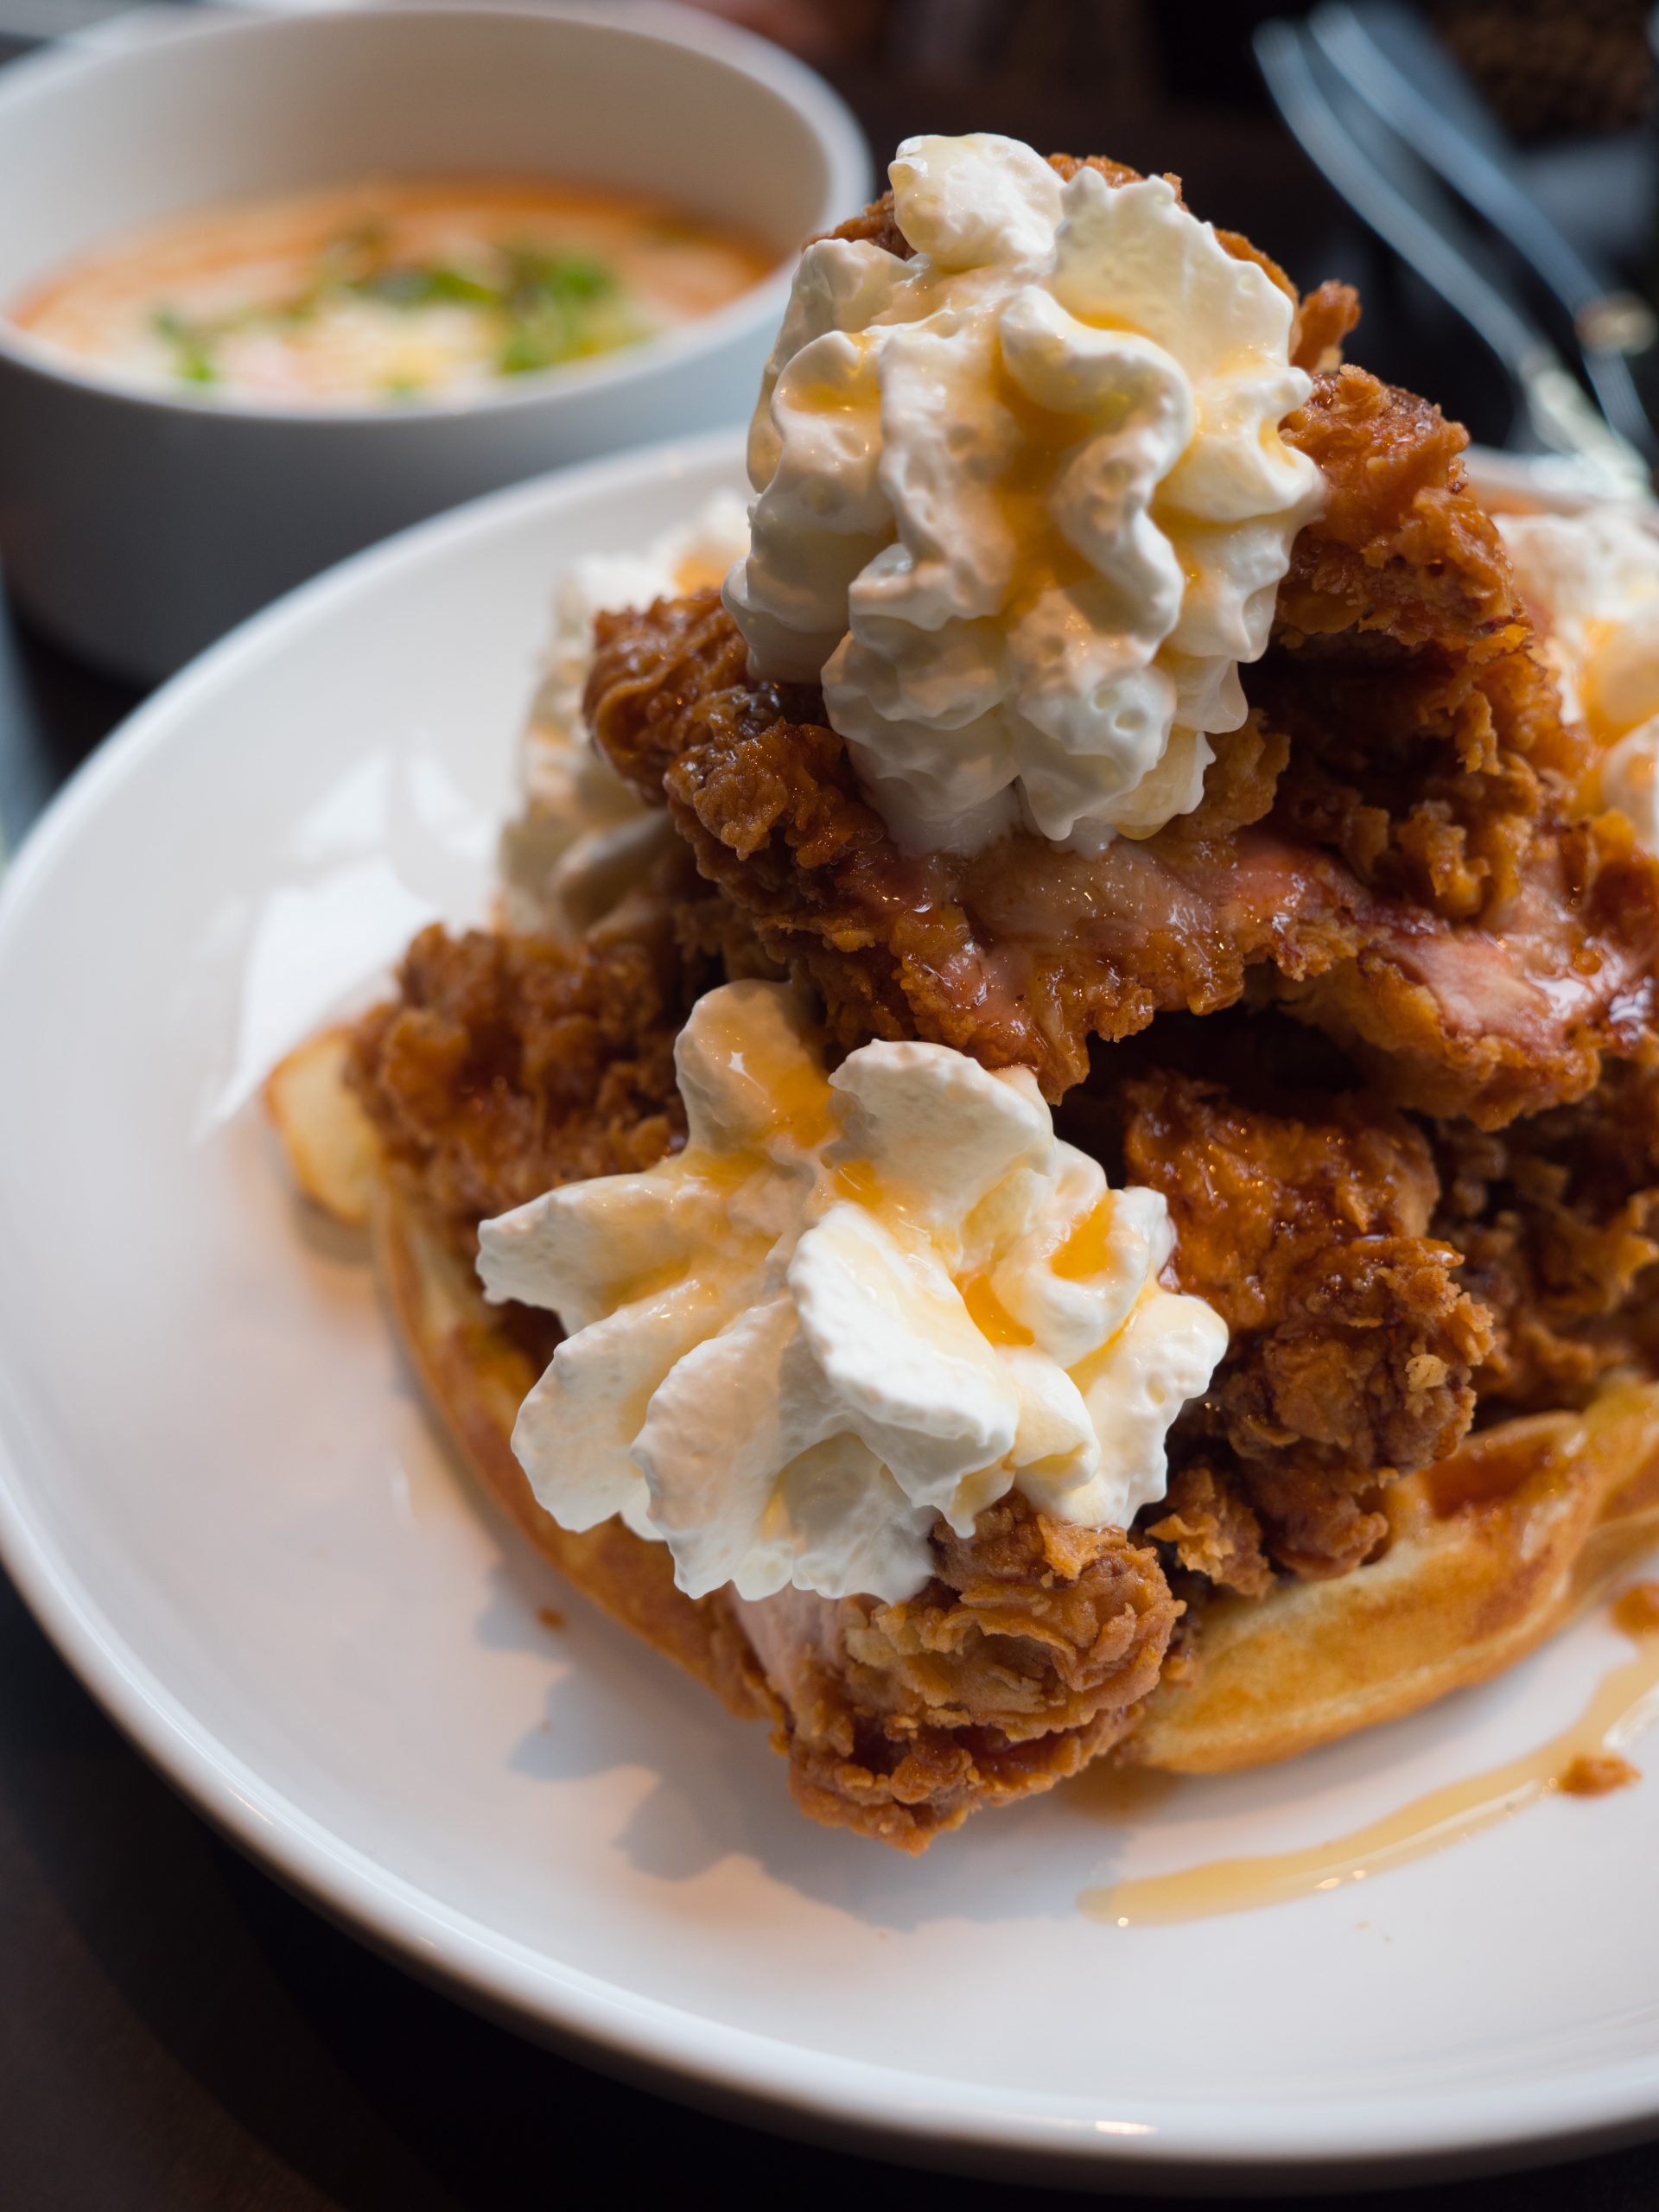 Uncle Ray's menu - chicken and waffles